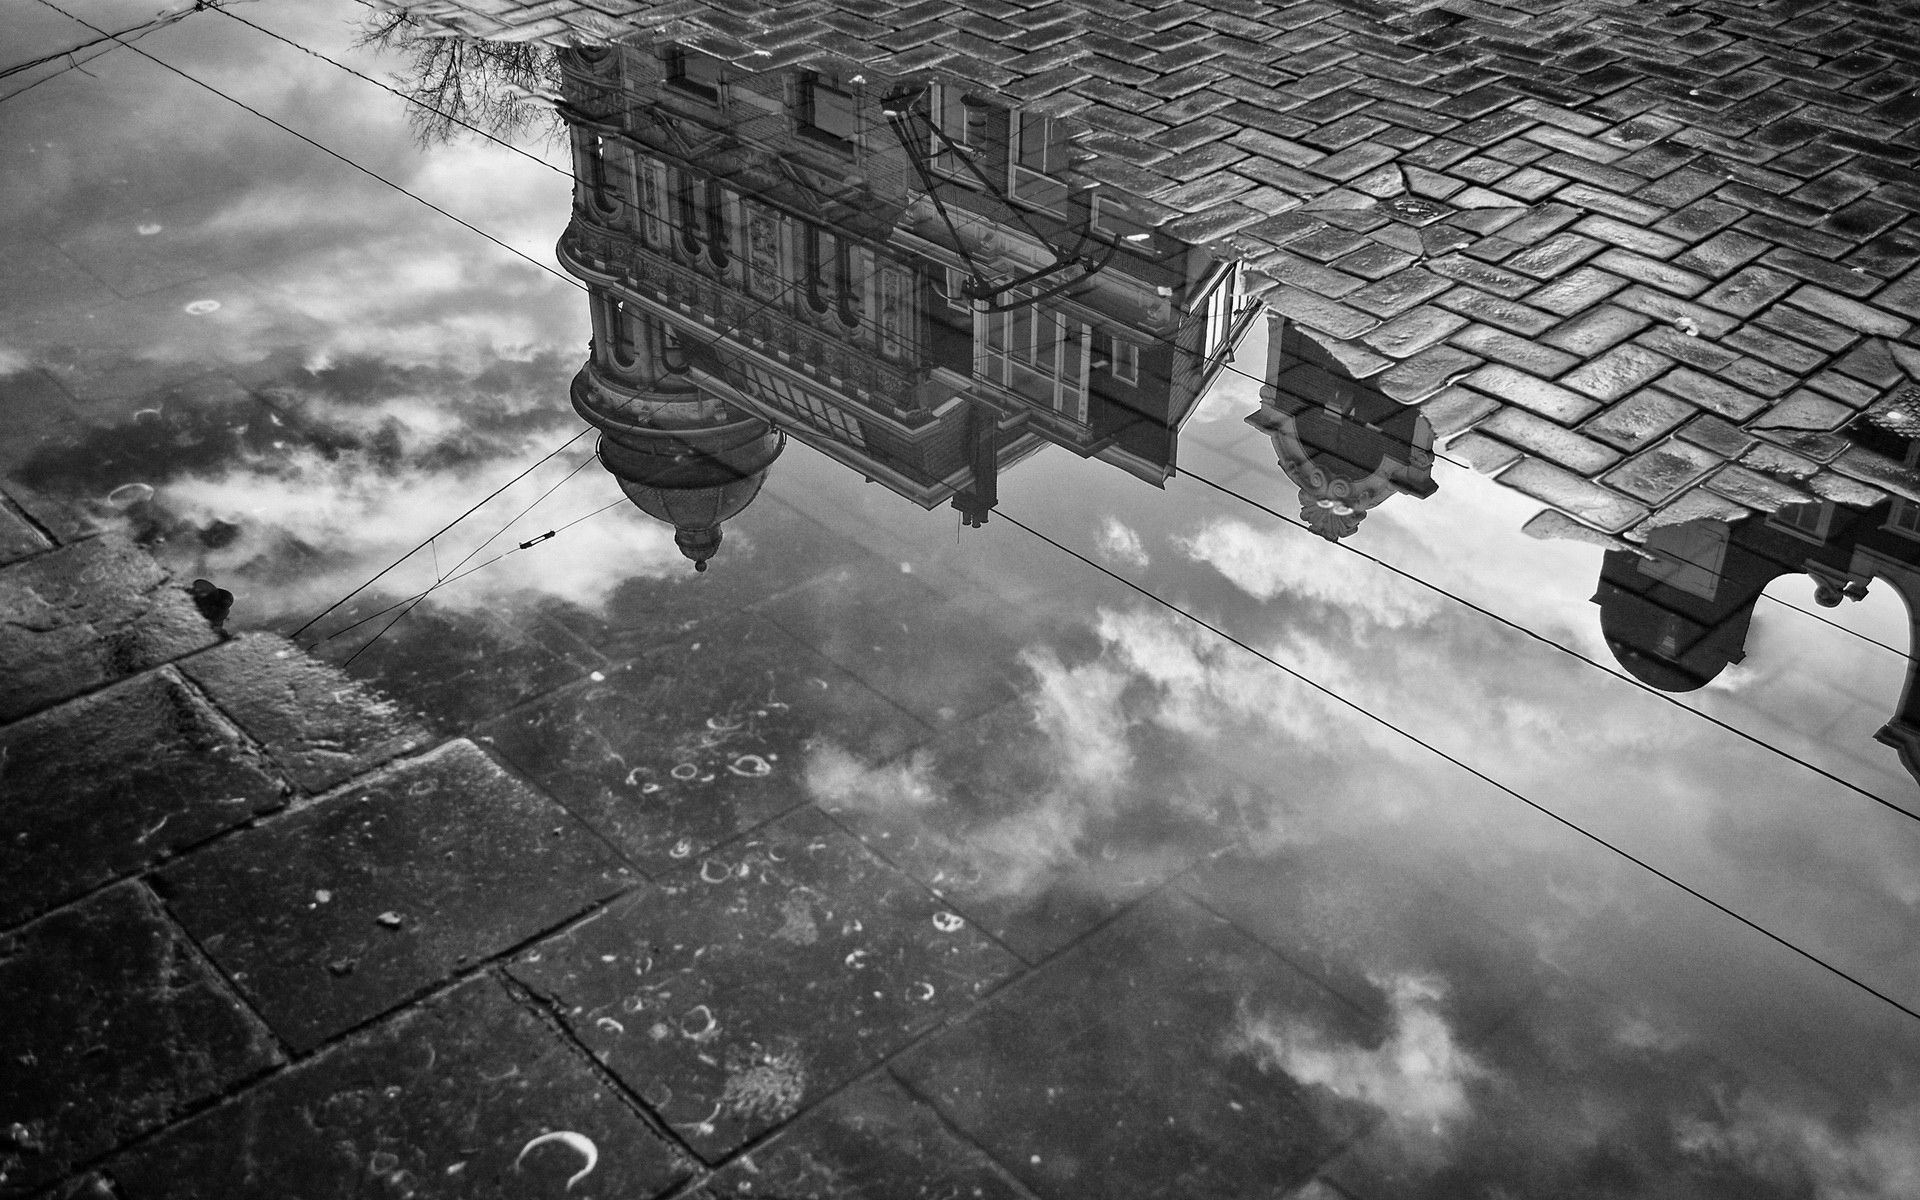 Puddle Wallpaper. Puddle Blood Background, Puddle Wallpaper and Puddle Reflection Wallpaper